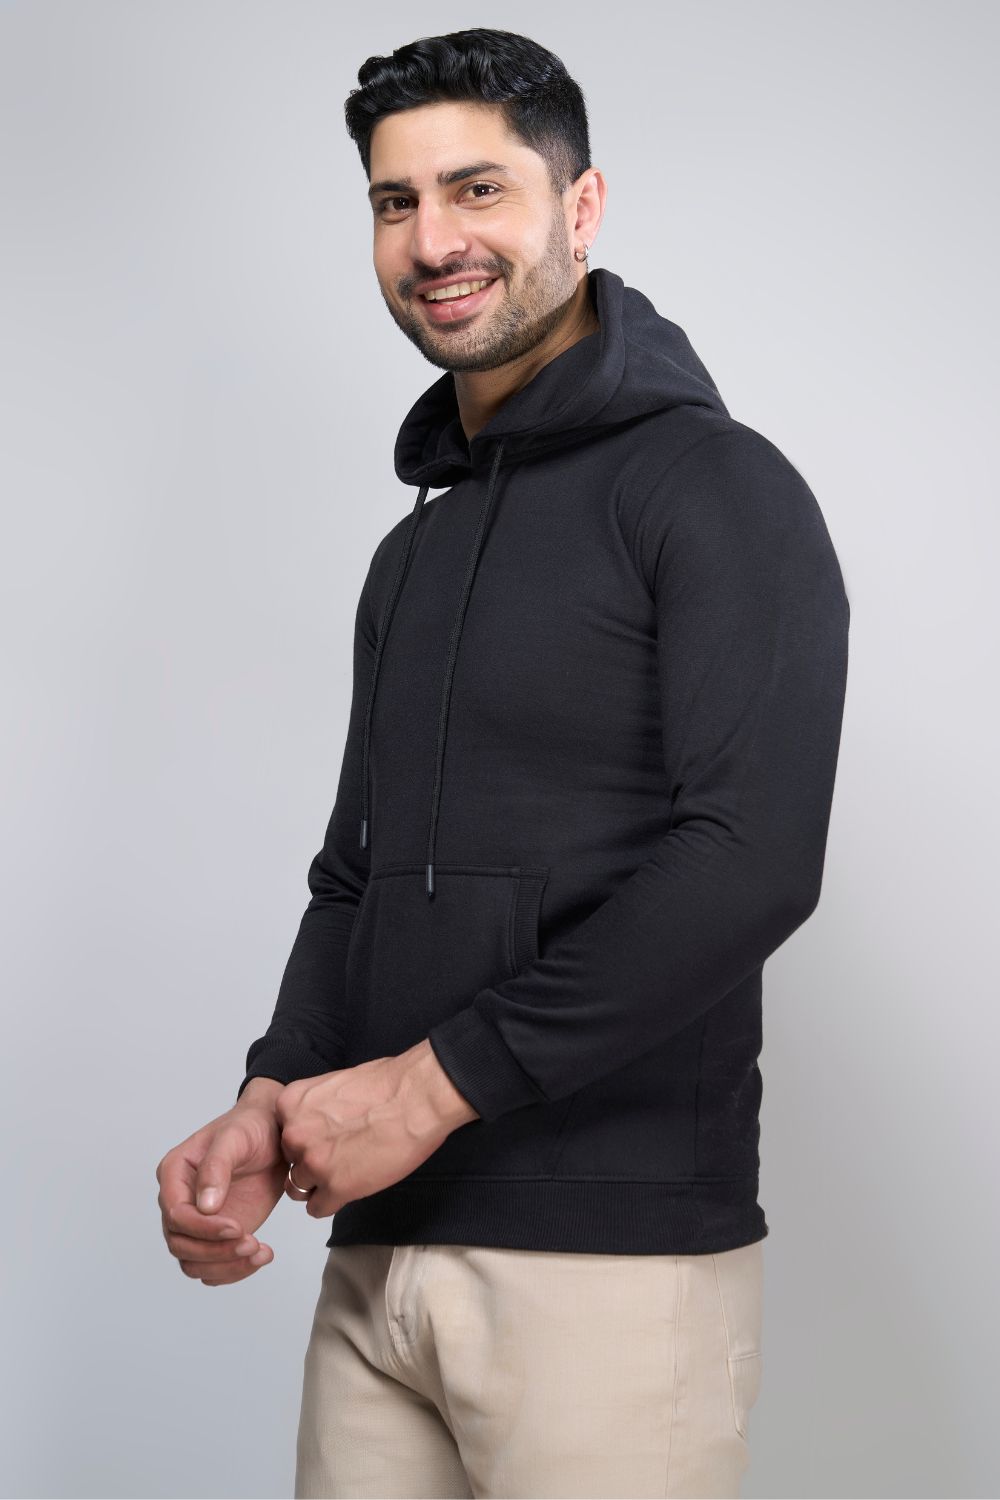 Black colored, hoodie for men with full sleeves and relaxed fit, side view